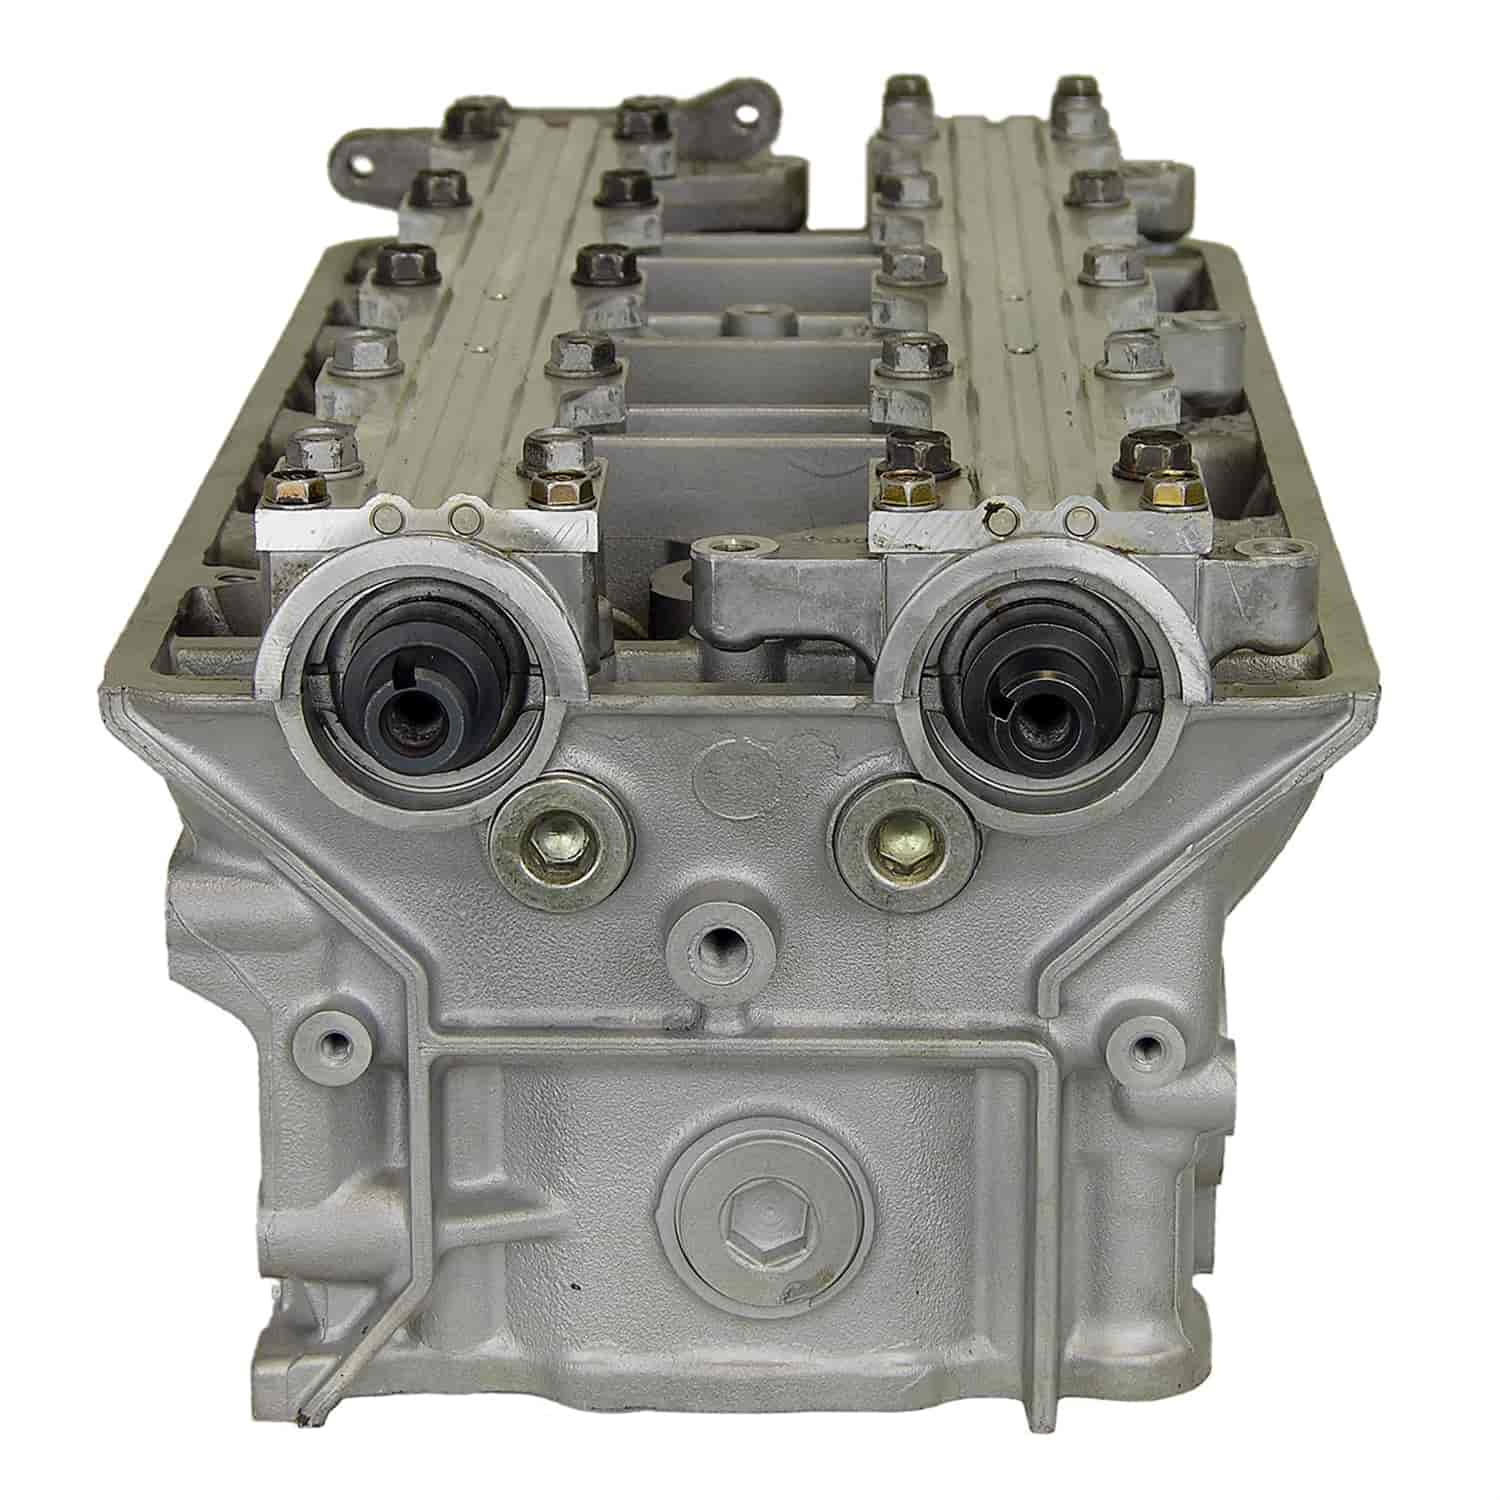 Remanufactured Cylinder Head for 1993-1997 Honda Prelude with 2.2L L4 H23A1/H23A4